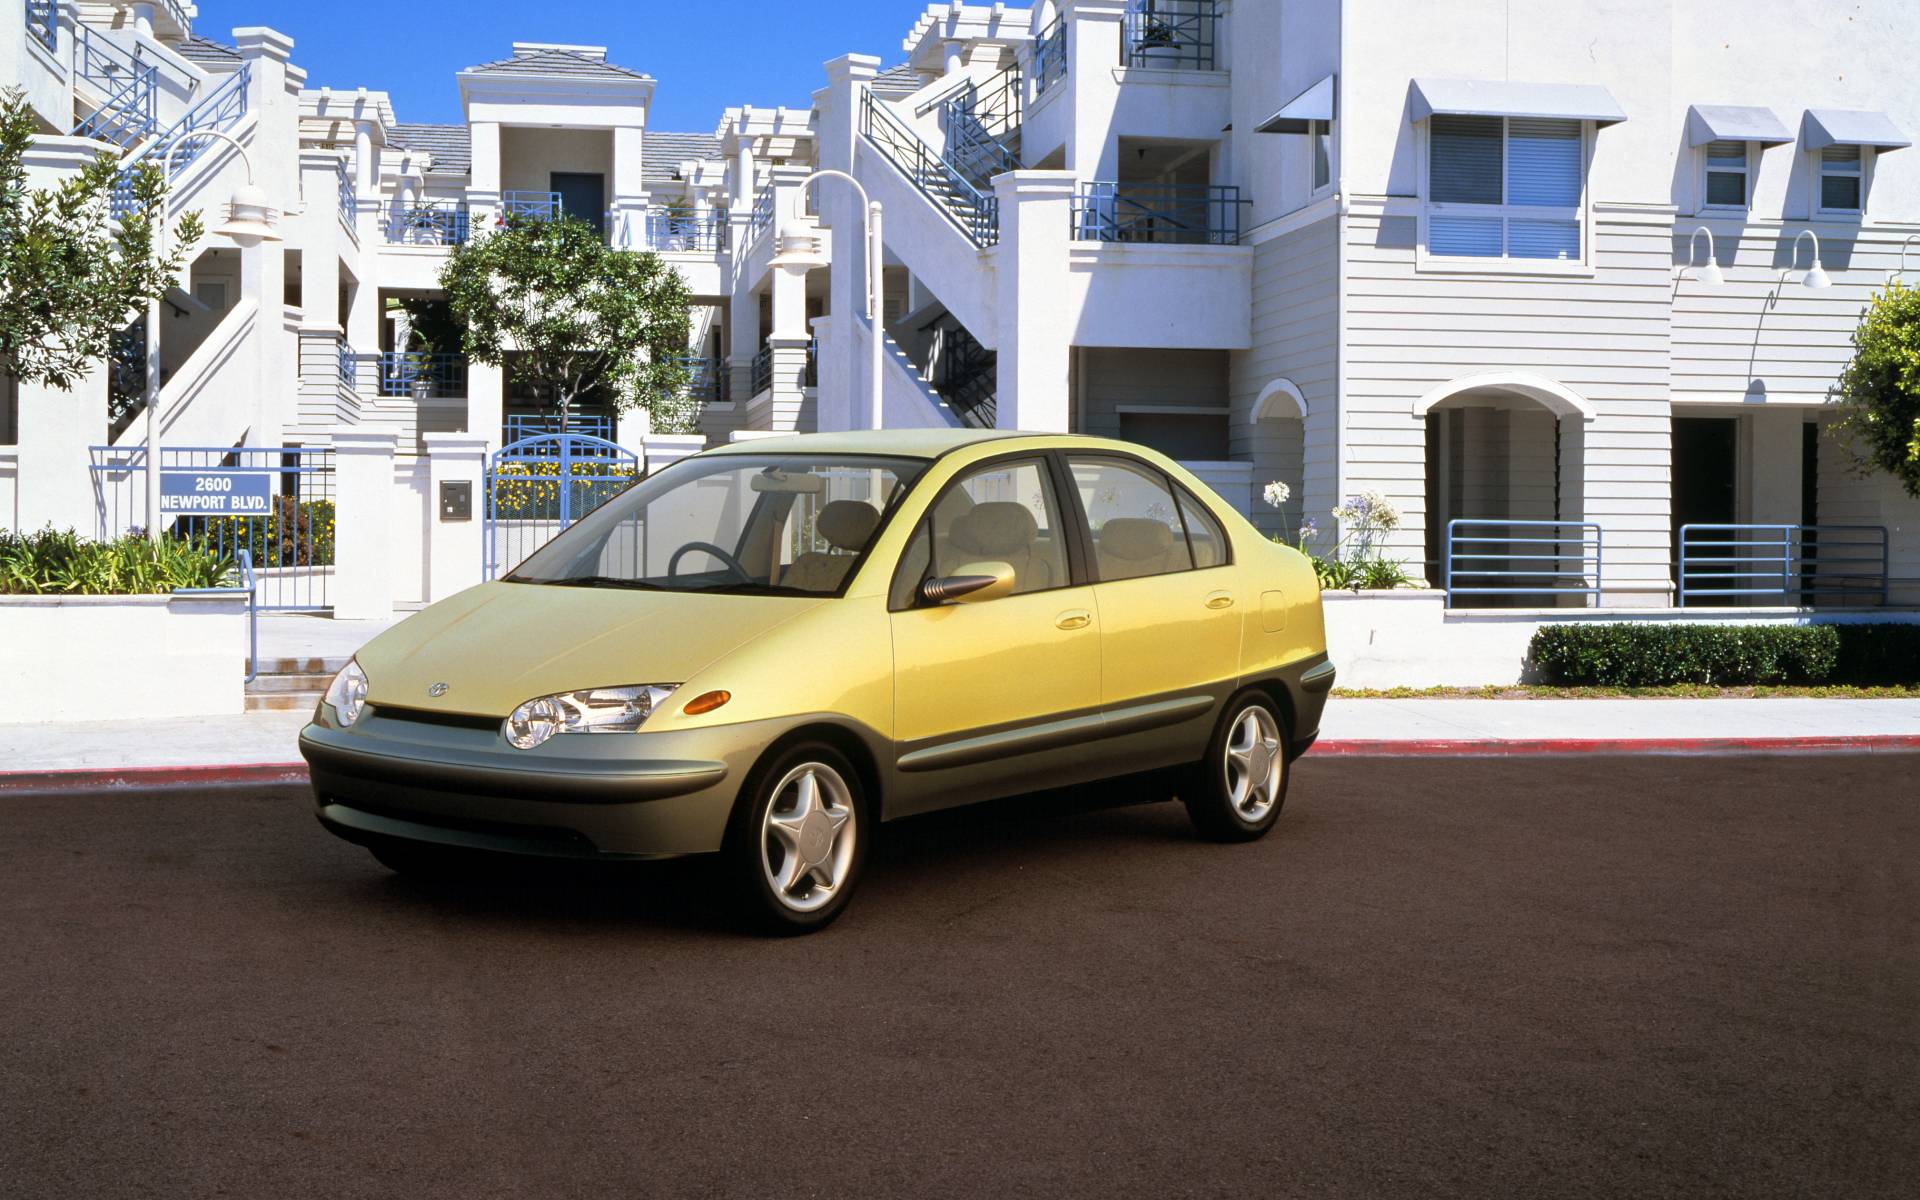 <p><strong>1995 Toyota Prius Concept</strong></p>